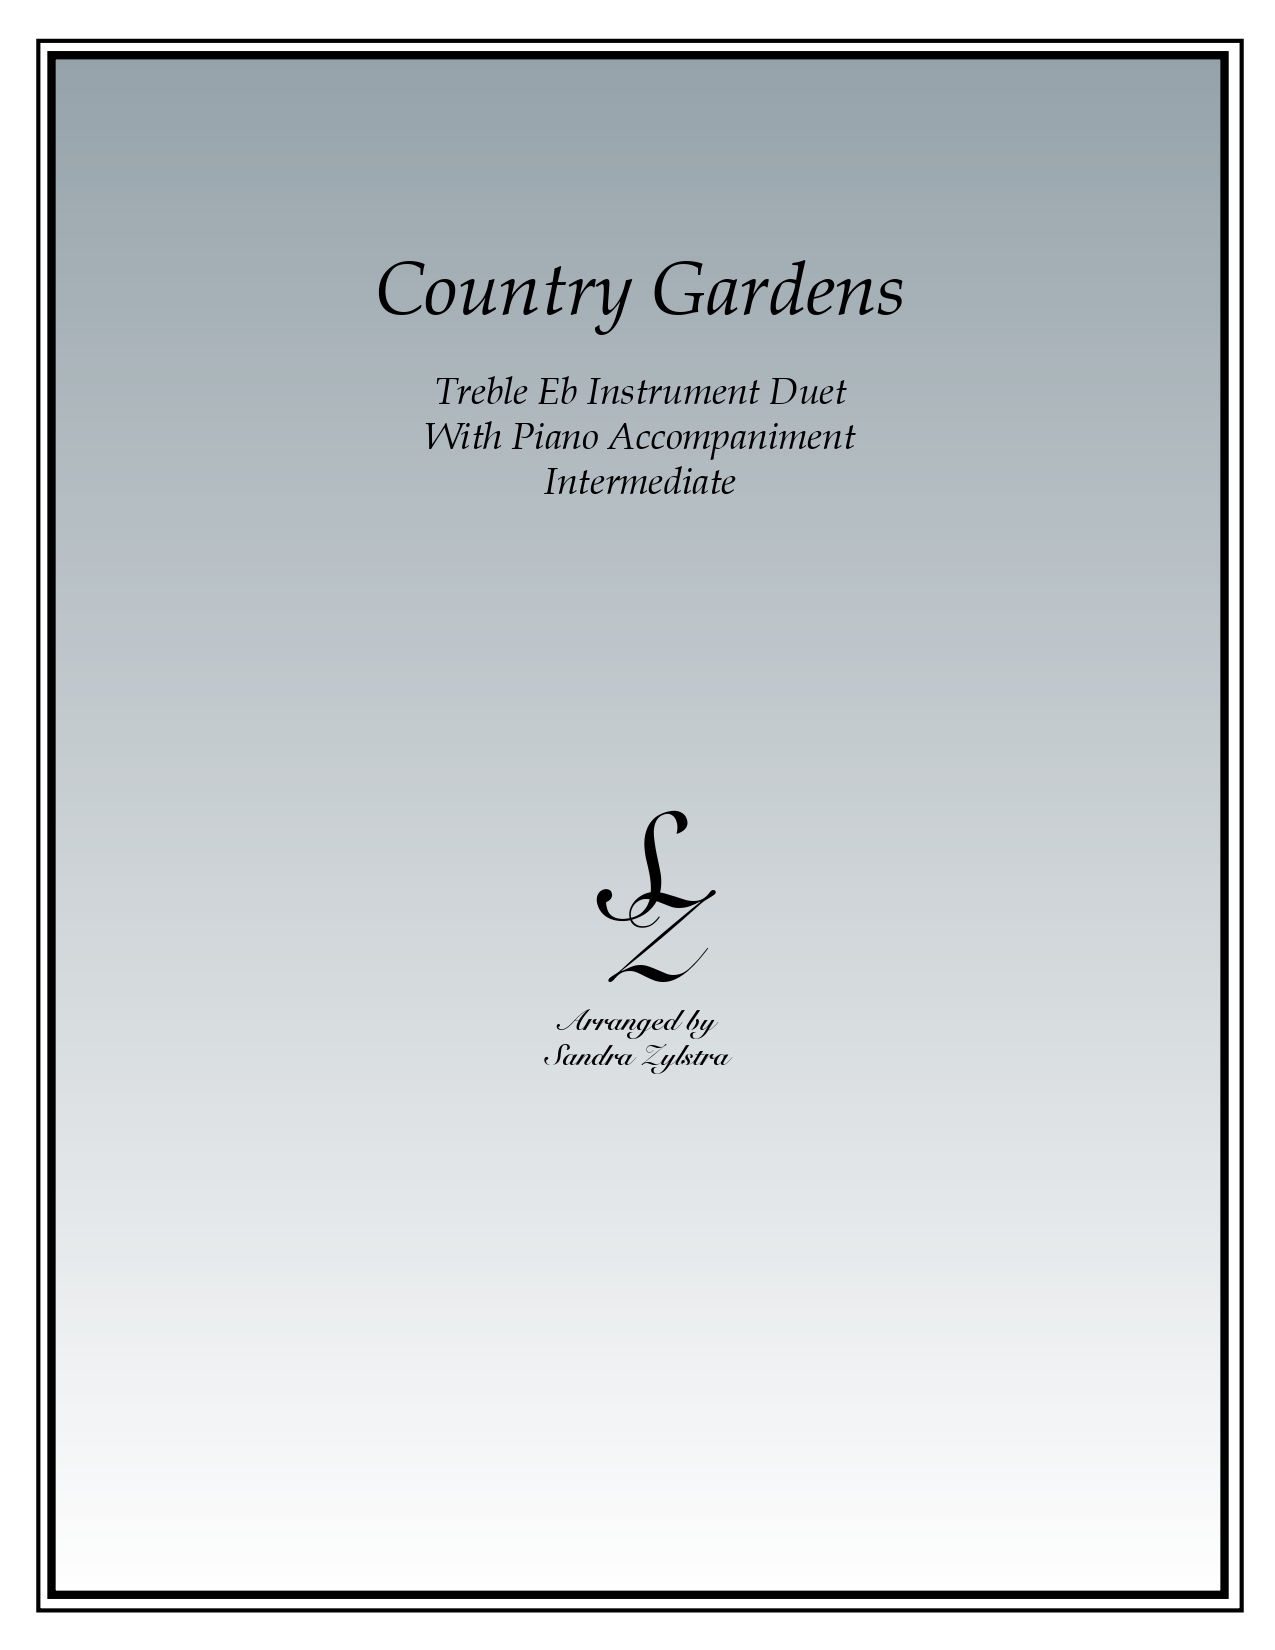 Country Gardens Eb instrument duet parts cover page 00011